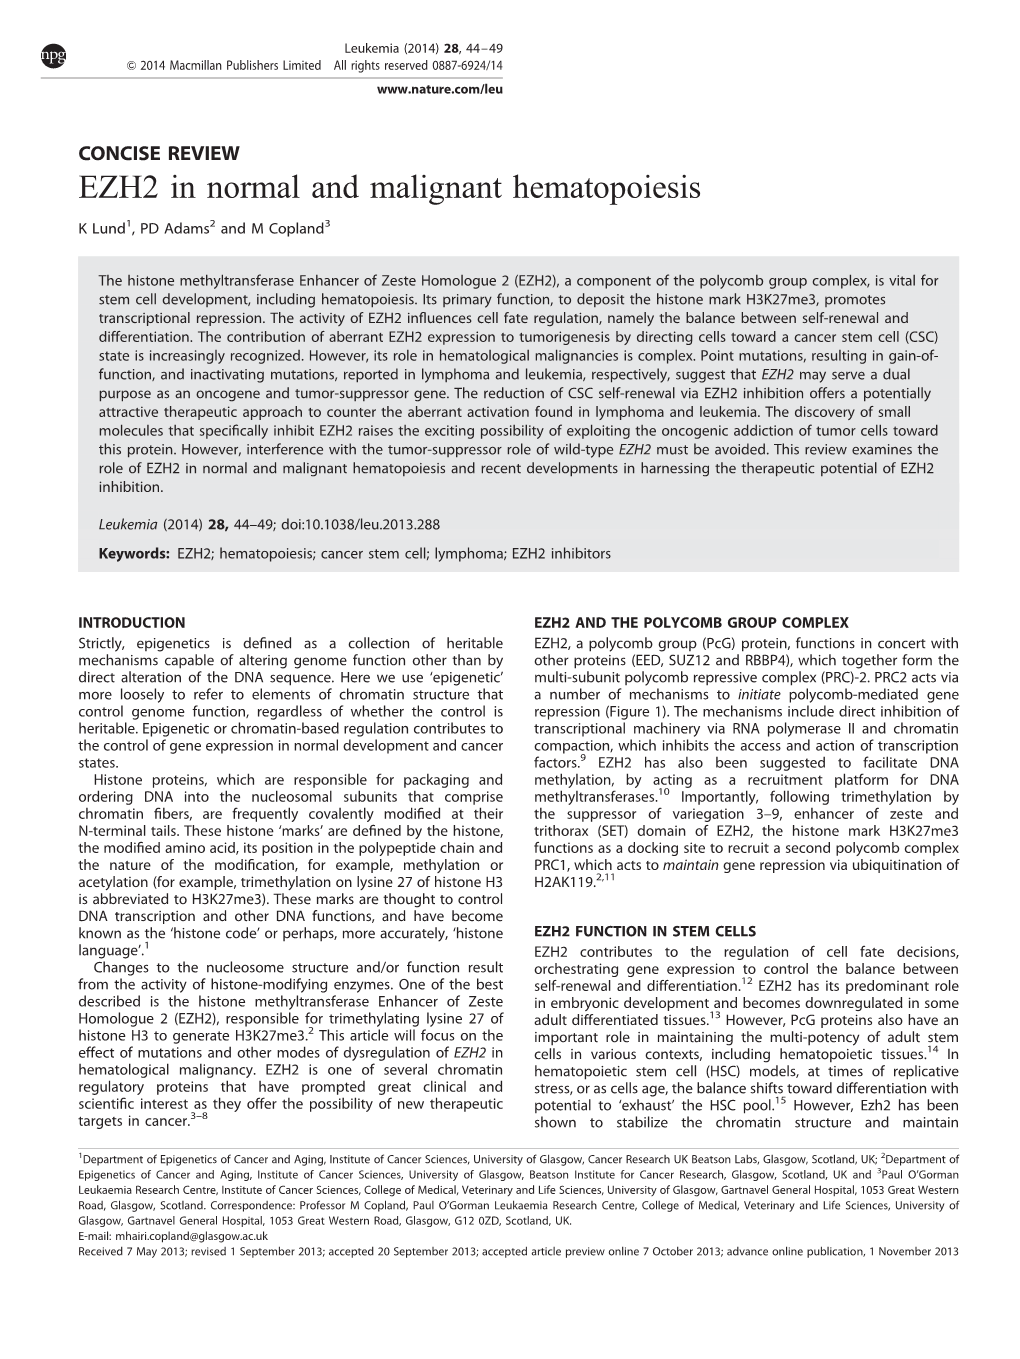 EZH2 in Normal and Malignant Hematopoiesis